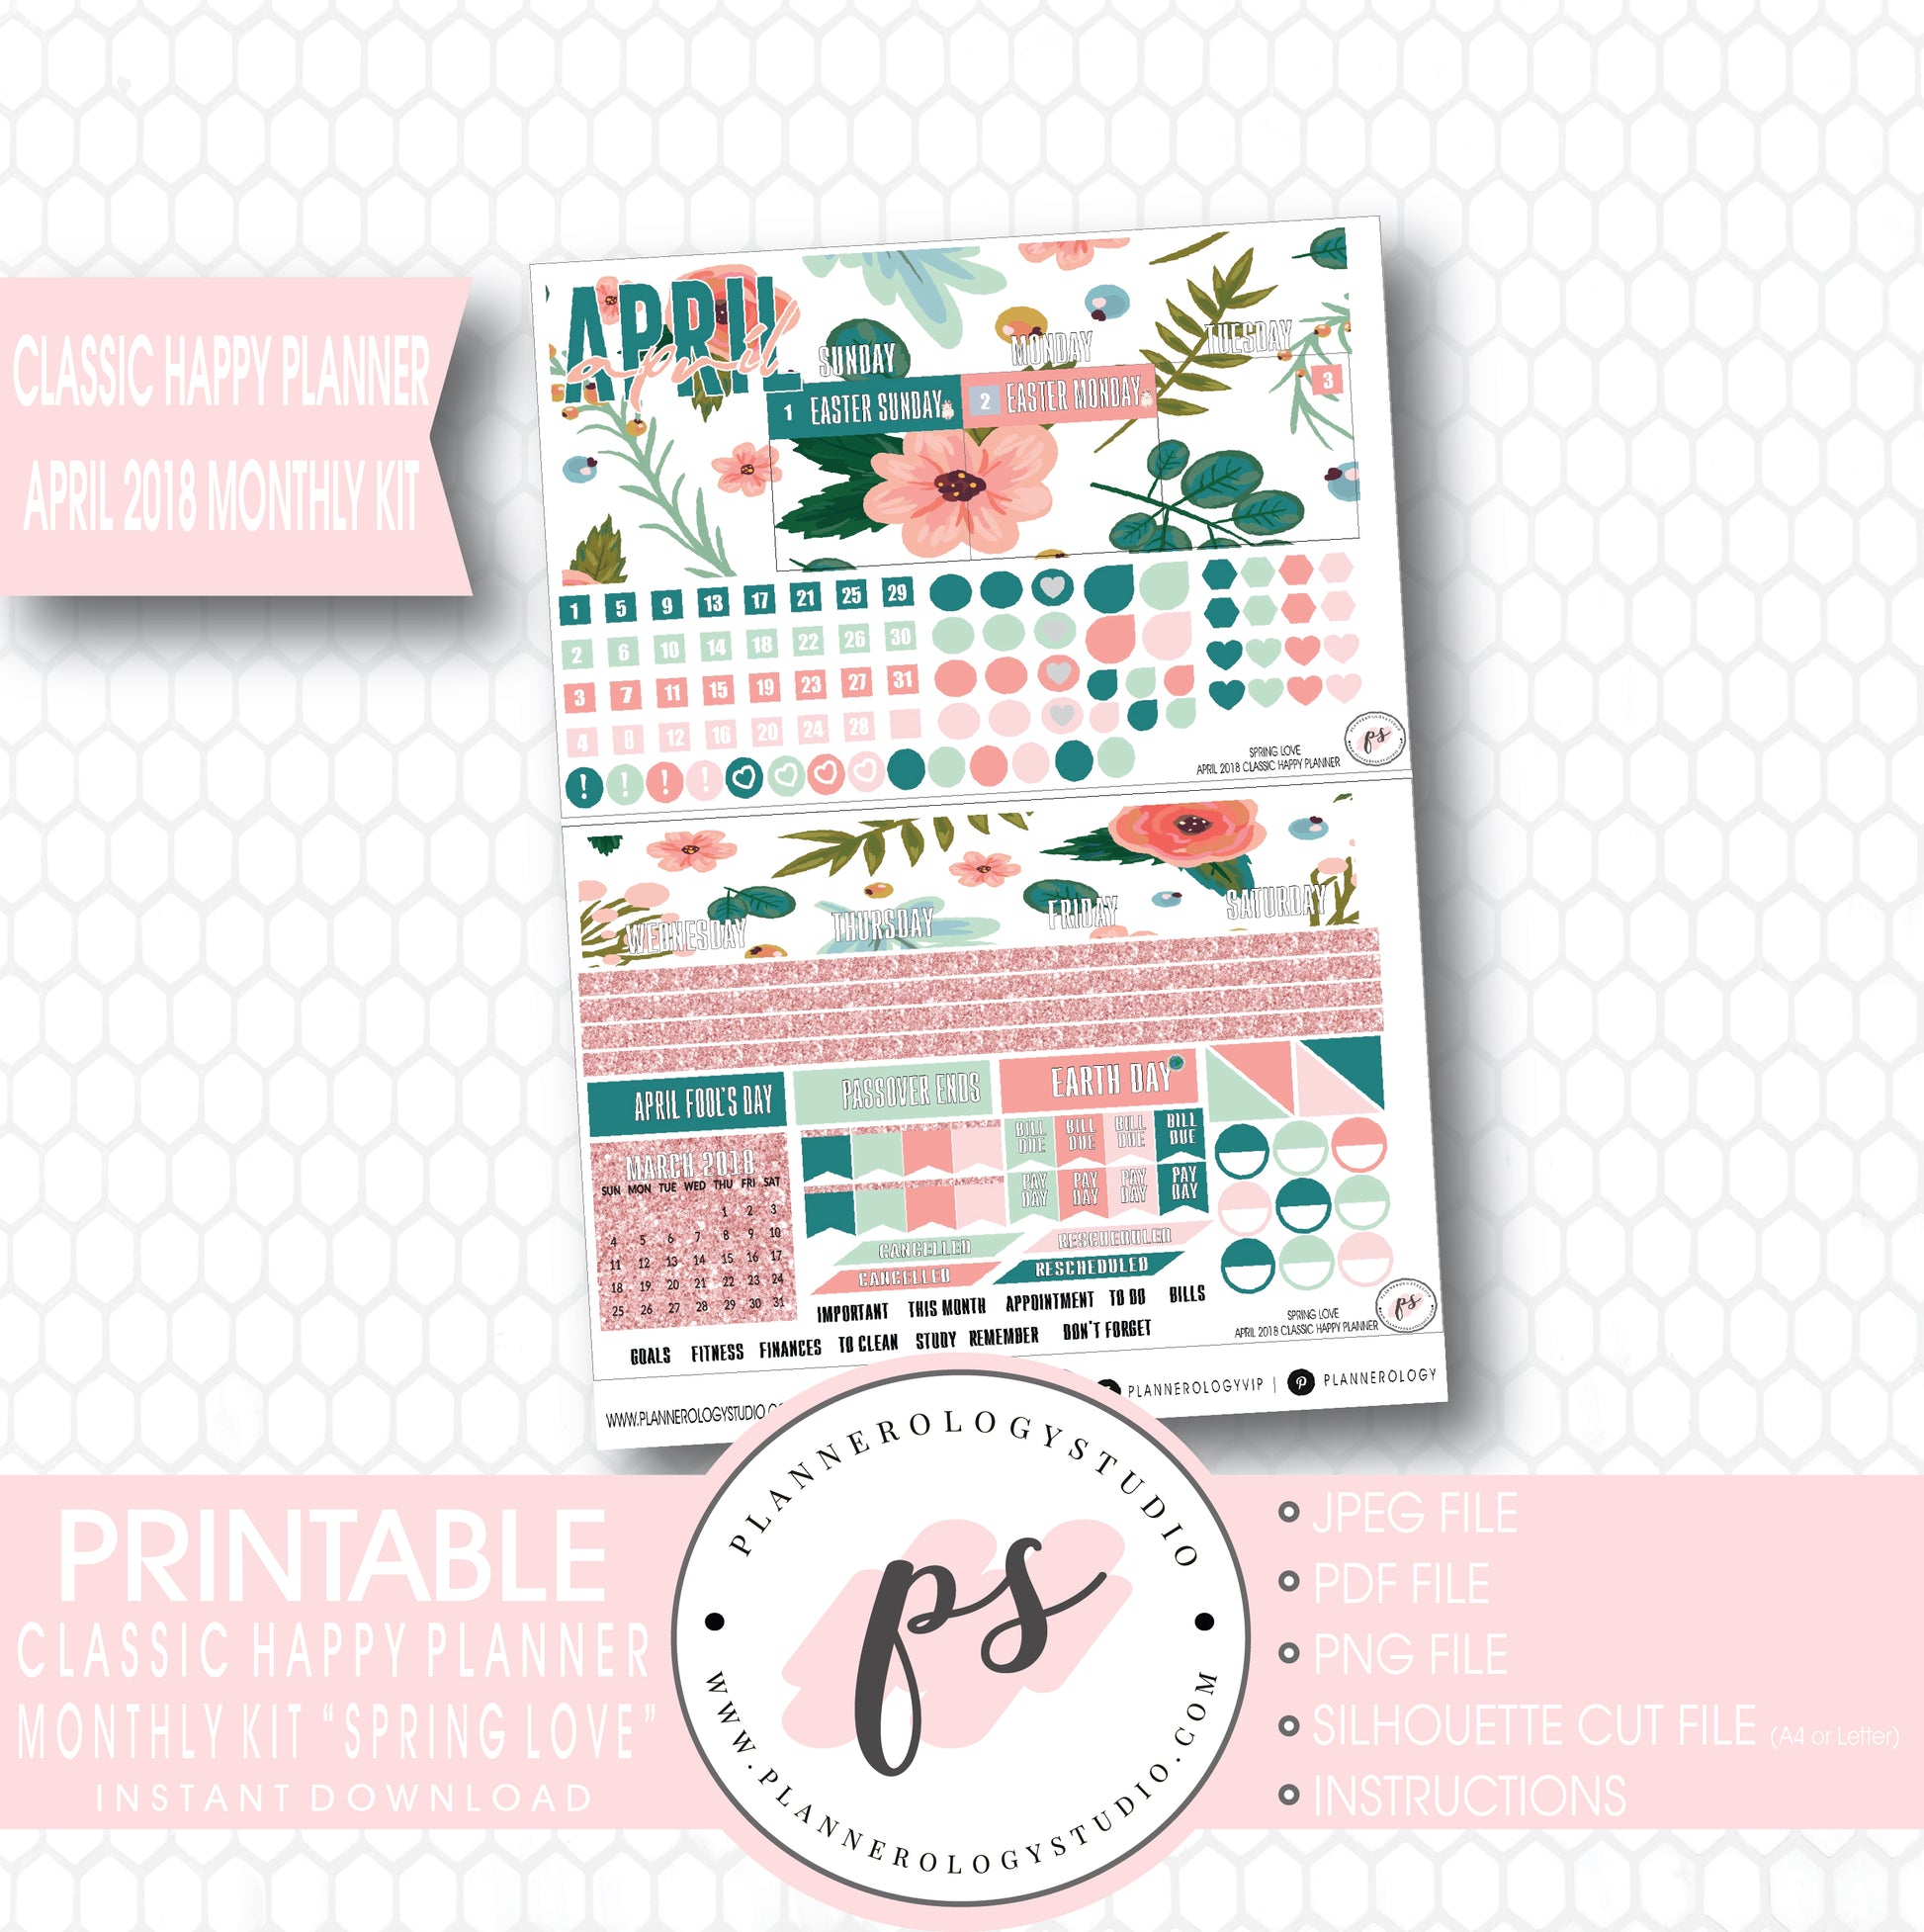 Spring Love April 2018 Monthly View Kit Digital Printable Planner Stickers (for use with Erin Condren) - Plannerologystudio